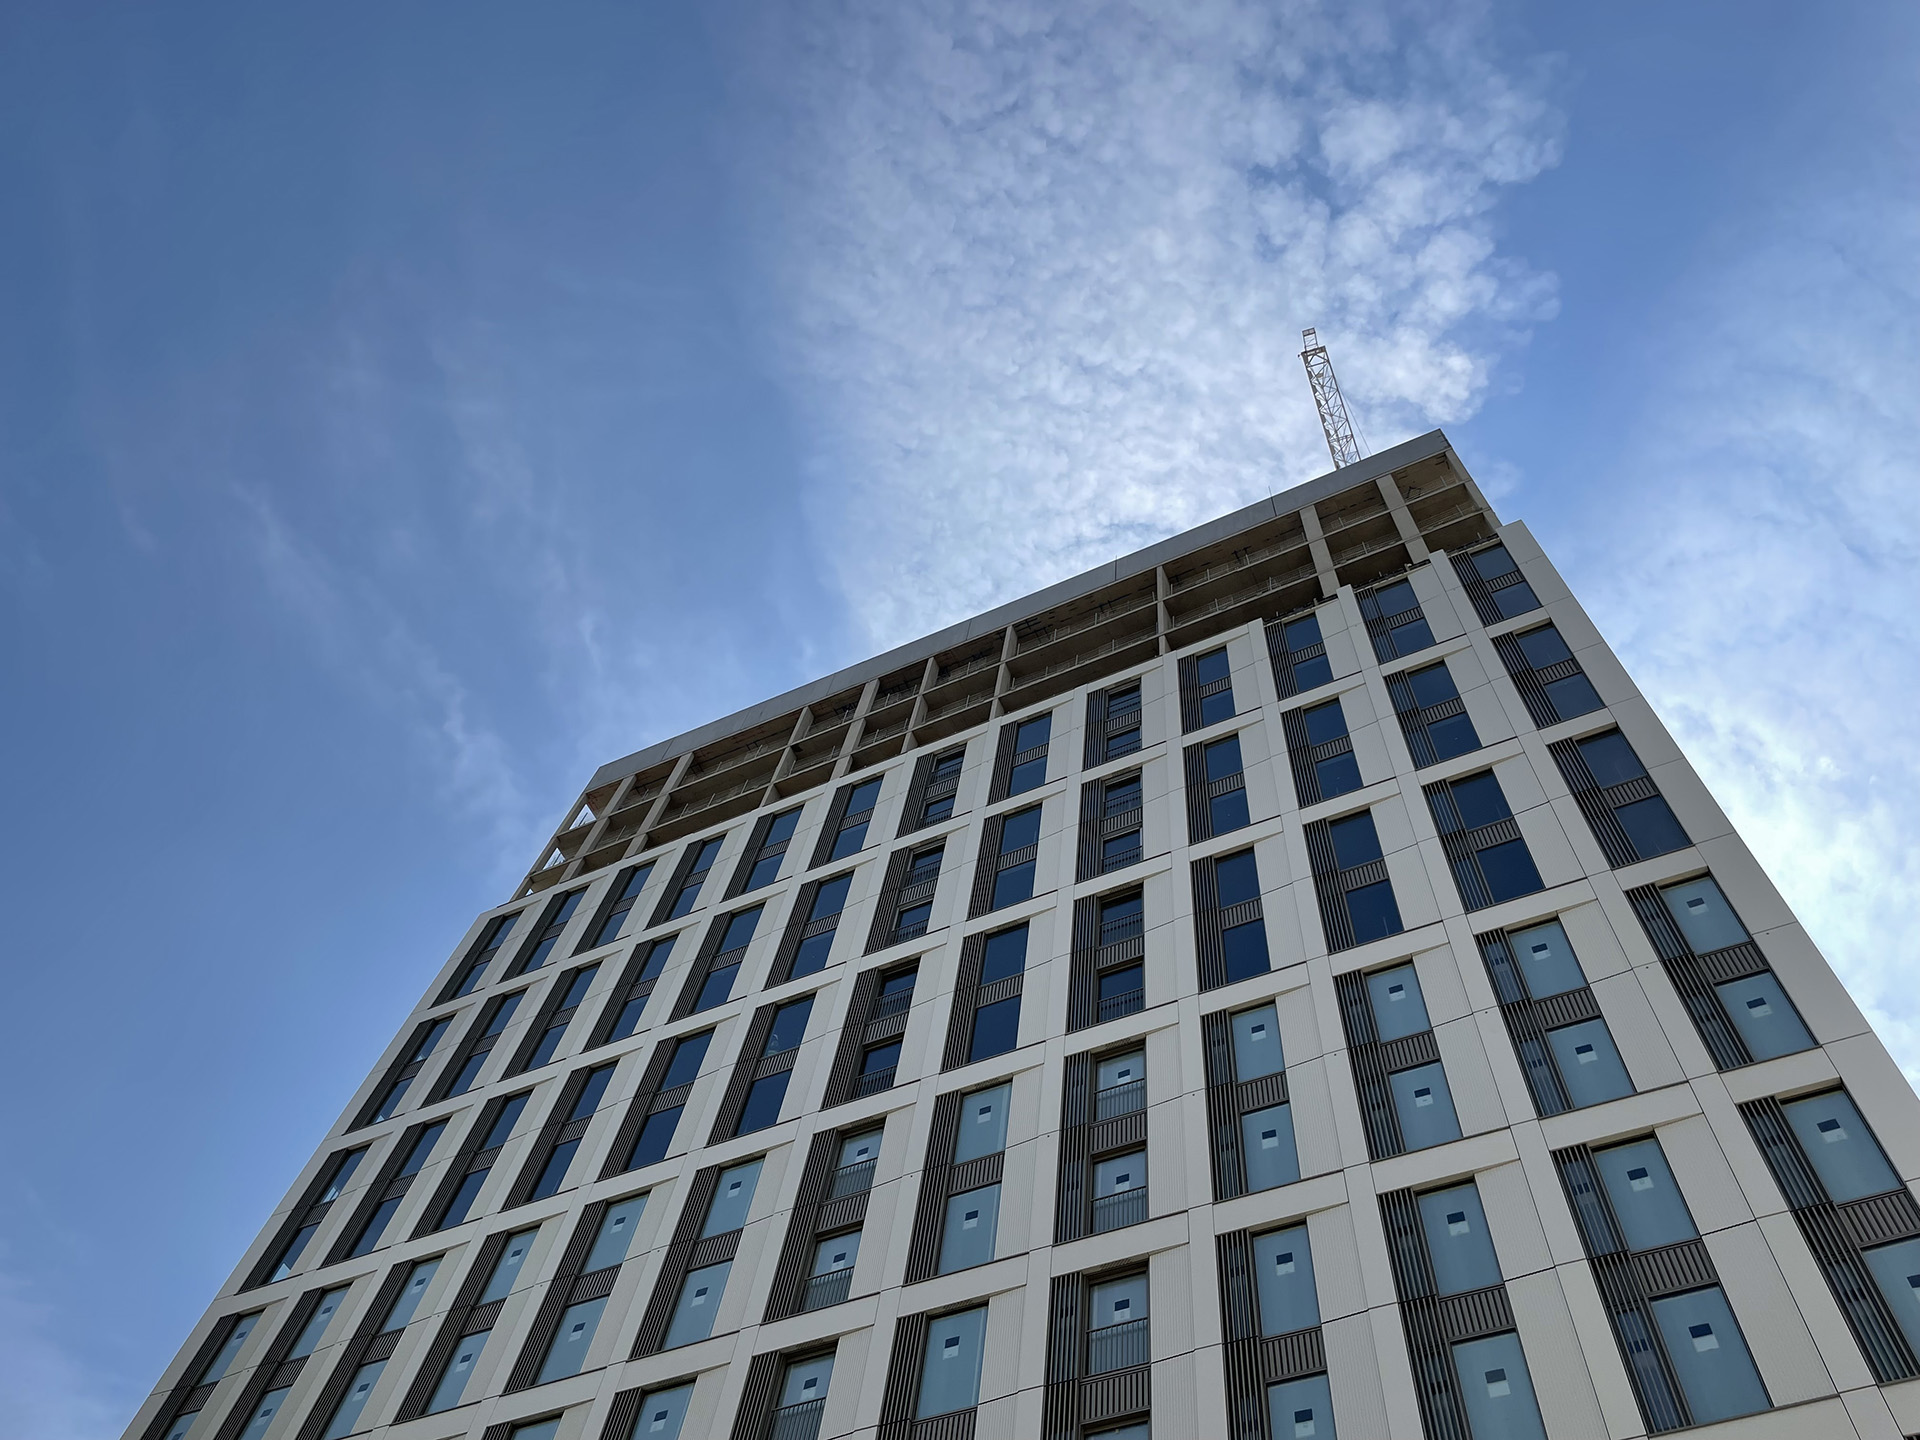 Sipral contributes to the Cherry Park project in Stratford, London by supplying 40,000 m² of façade